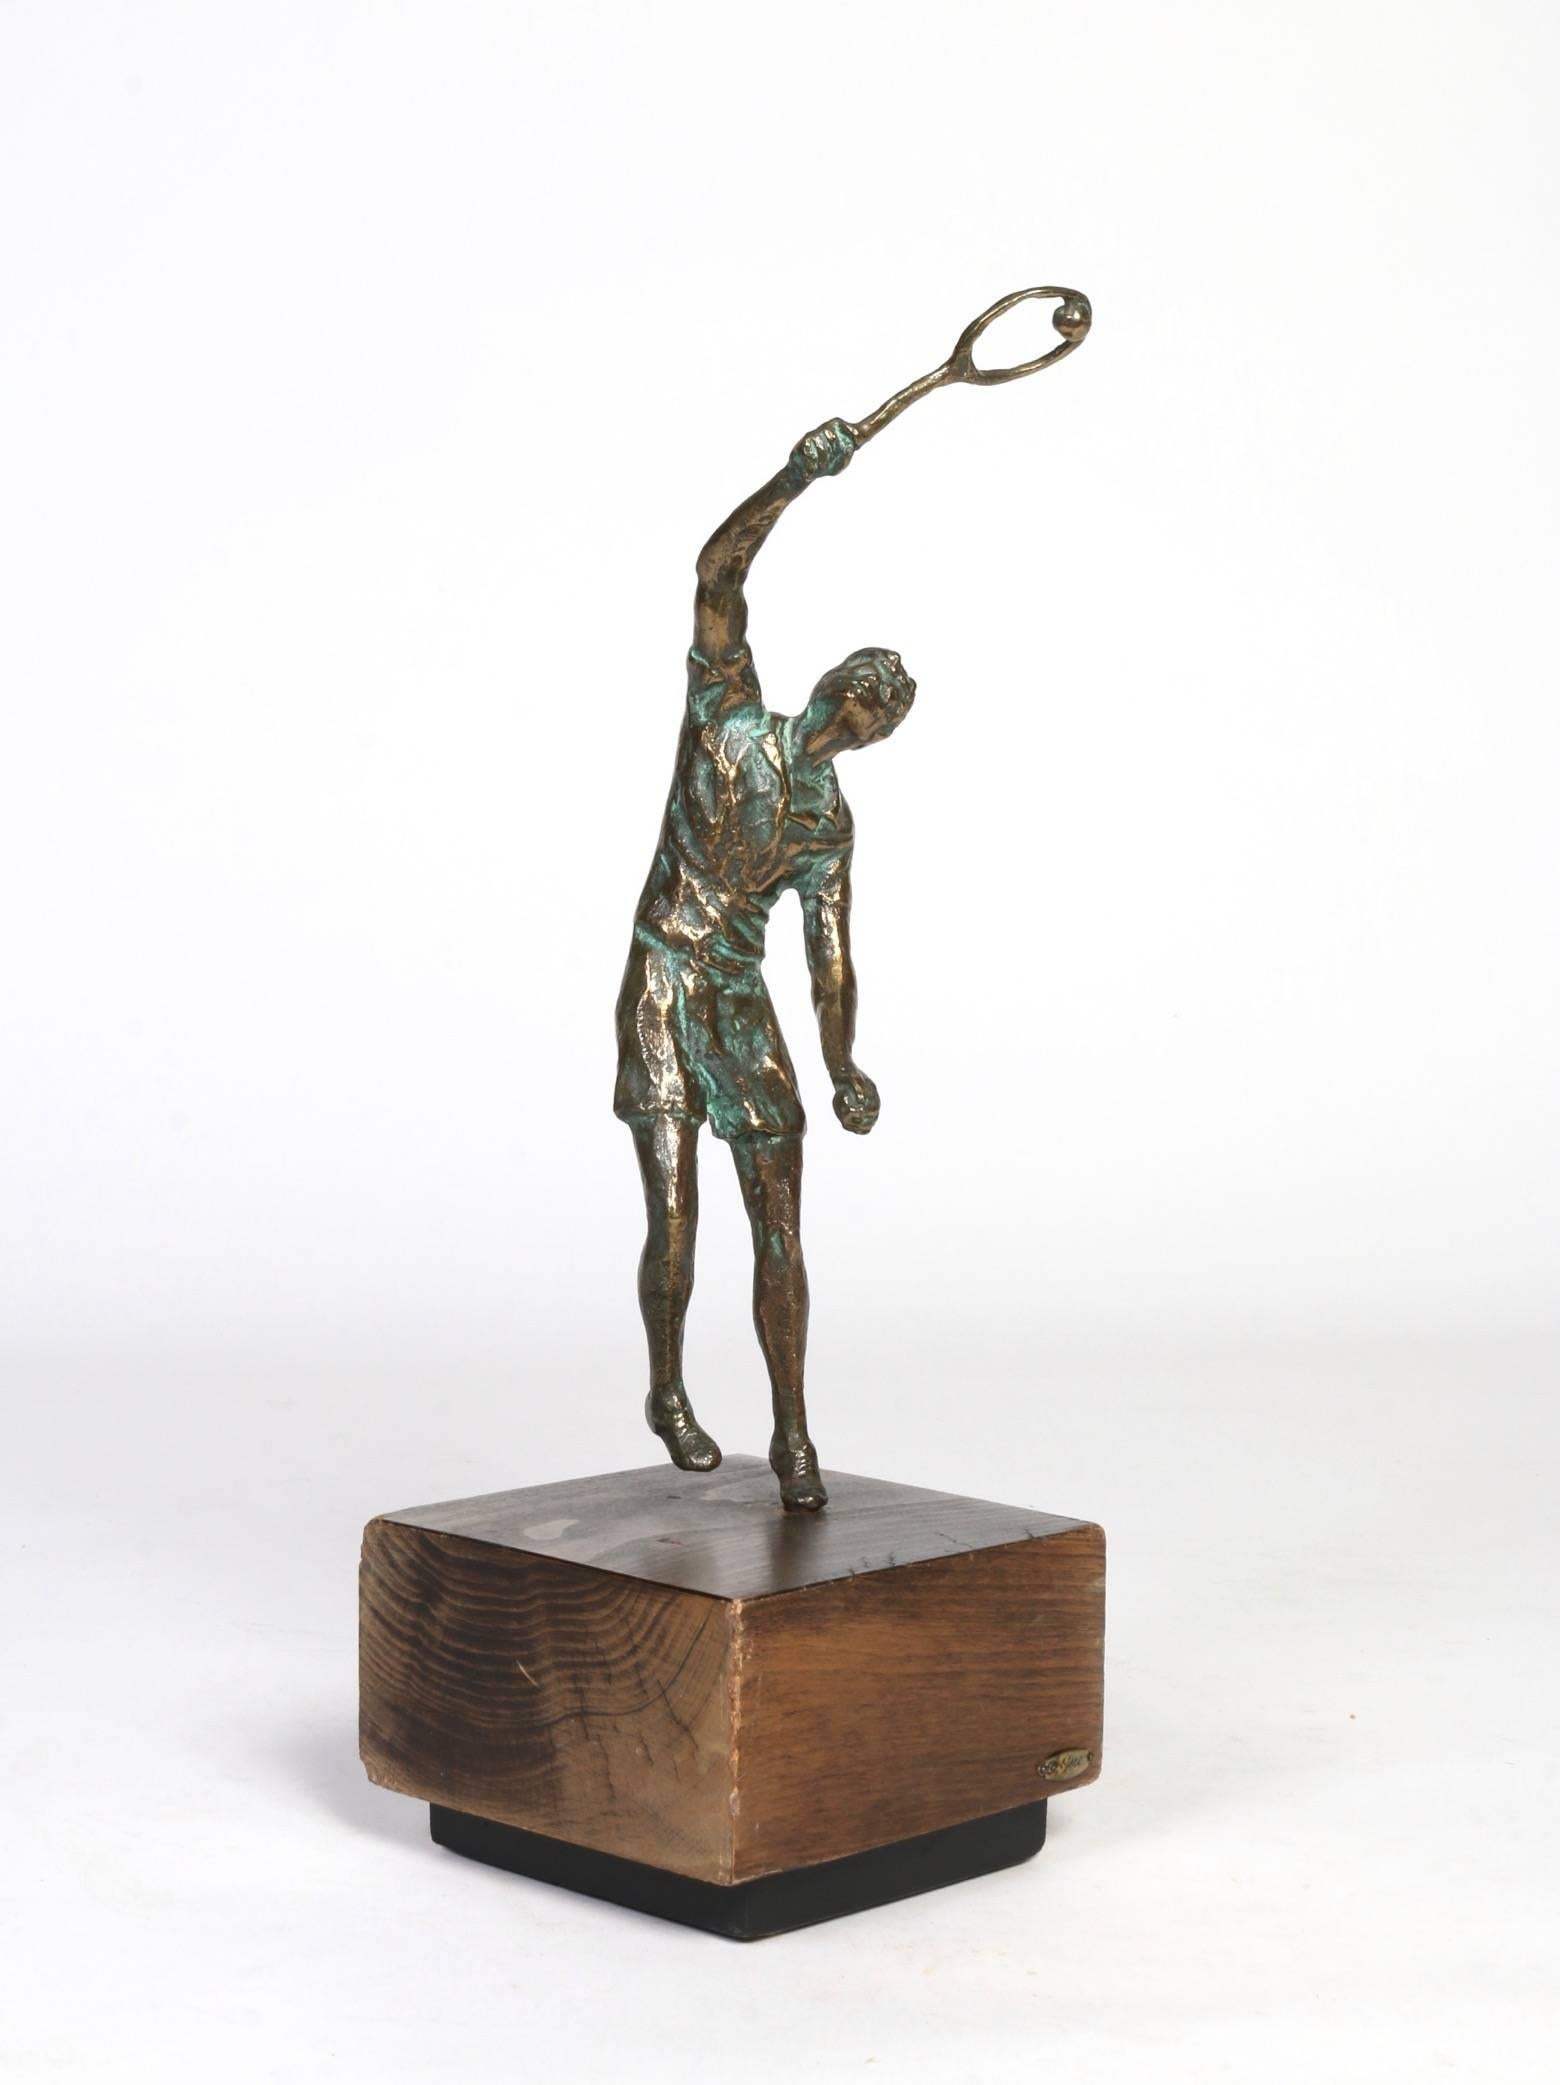 Curtis Jere Bronze Figural Sculpture of Tennis Player.  Fabulous detail - looks amazing from all angles.  A wonderful gift or decorative table top decoration for the tennis player in your life. 